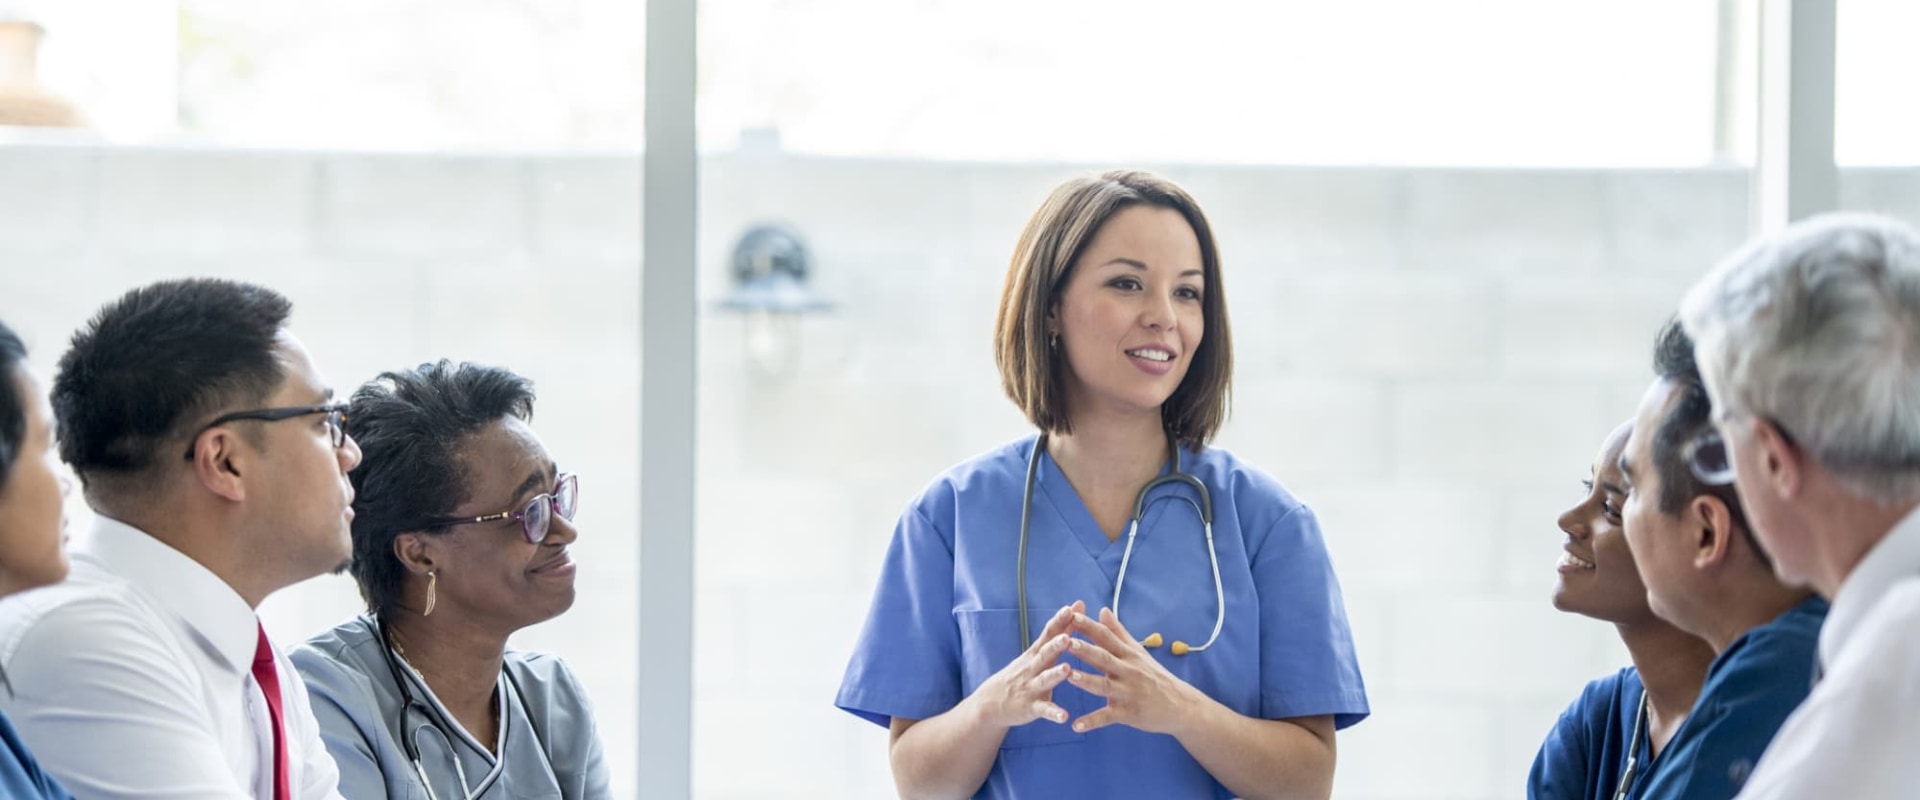 9 Networking Tips for Healthcare Professionals